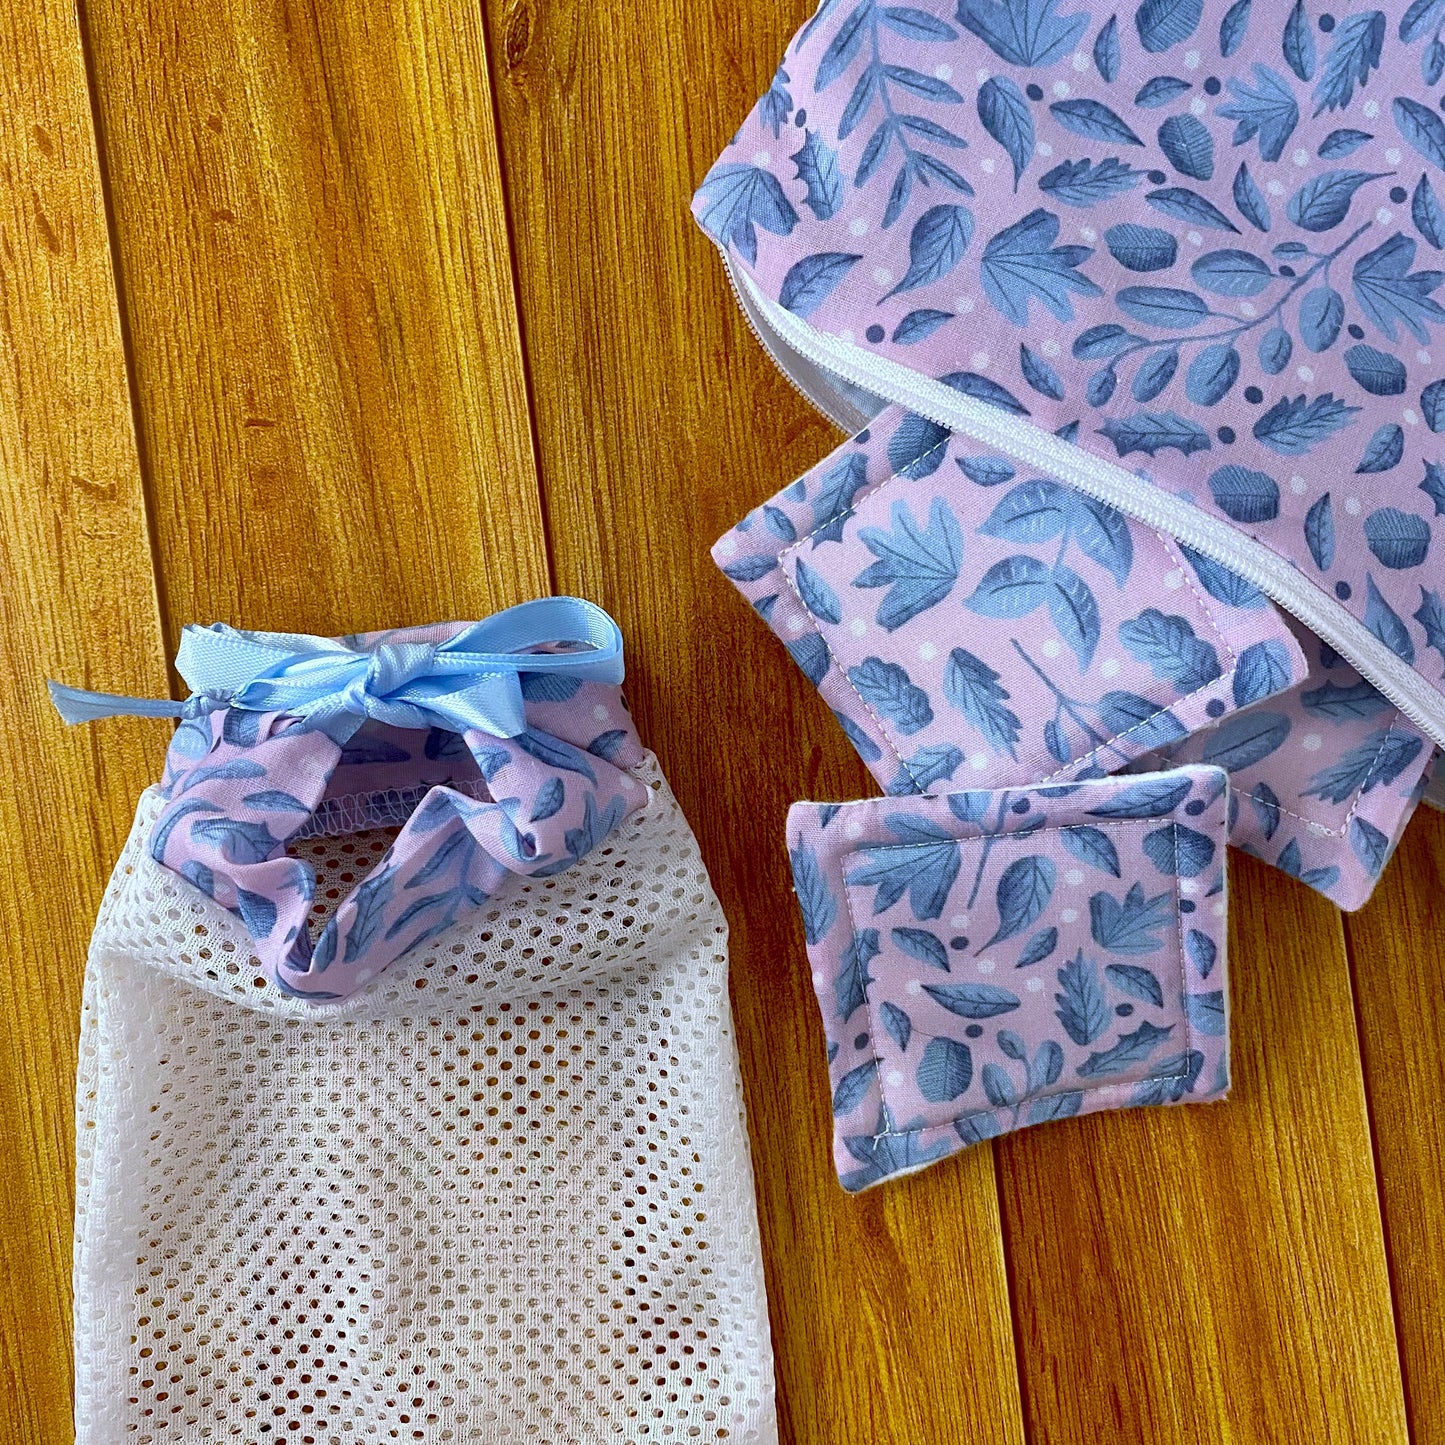 reusable skincare pads coming out of a pouch with a washbag next to them, all in a blue foliage pattern with a wooden background